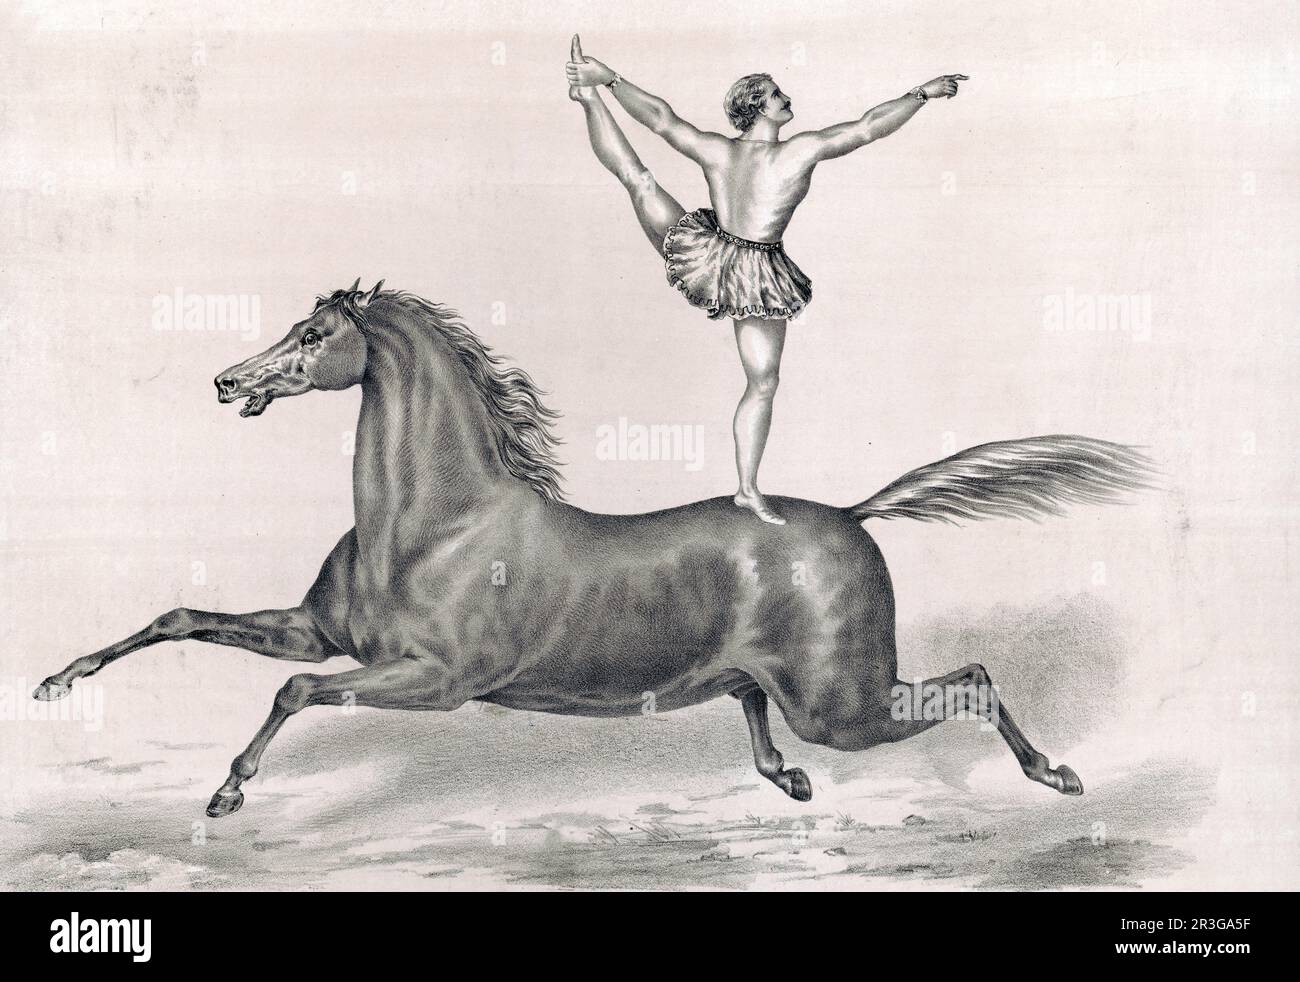 Vintage print of a male circus performer standing and riding on a bareback horse. Stock Photo